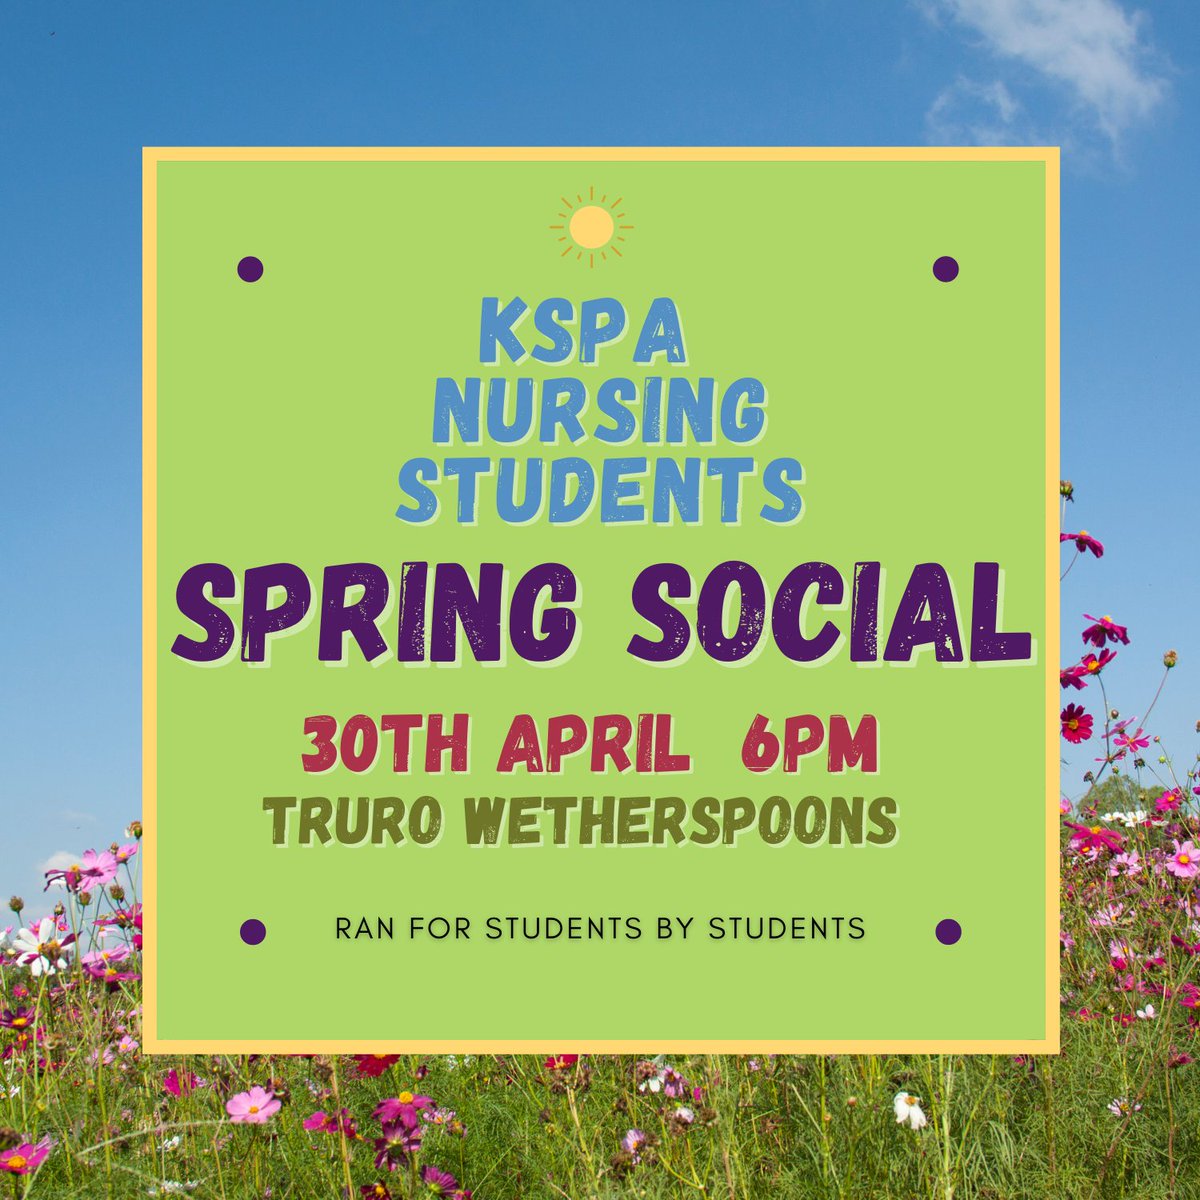 🌟This Saturday! 🥳
Attention Truro KSPA Campus students!!!
We've taken matters into our own hands and organised ourselves a social! 
Come say hi! 🤗 
6pm, Truro Wetherspoons 😘

#PUNC21 #PUNC20 #PUNC19 #PUNC18
@PlymNurSoc @PlymStudentHub @CHealthLib @upsu @PlymUni @PUNC18_Lee